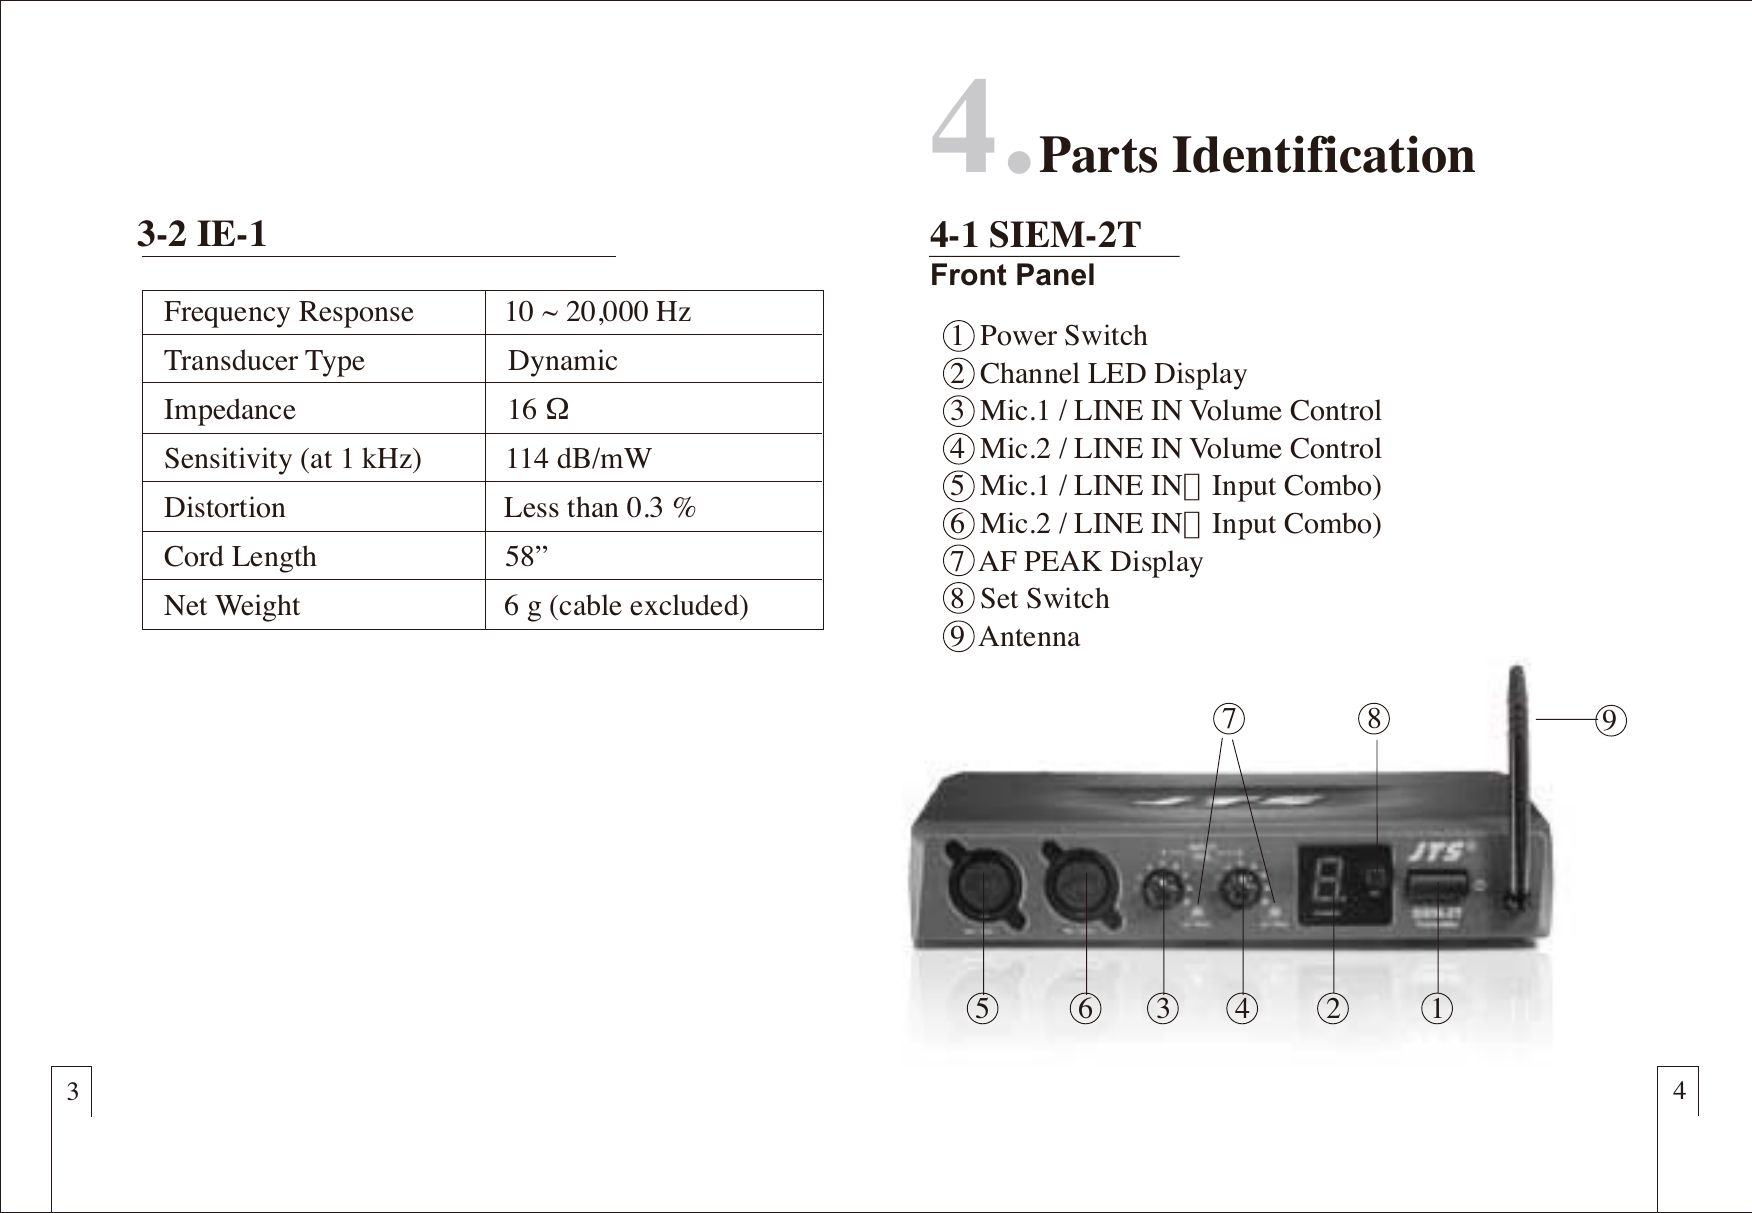   912365 4874. Parts Identification4-1 SIEM-2TFront Panel341  Power Switch2  Channel LED Display3  Mic.1 / LINE IN Volume Control4  Mic.2 / LINE IN Volume Control5  Mic.1 / LINE IN（Input Combo)6  Mic.2 / LINE IN（Input Combo)7  AF PEAK Display8  Set Switch     9  AntennaFrequency Response            10 ~ 20,000 HzTransducer Type                   DynamicImpedance                            16 ΩSensitivity (at 1 kHz)           114 dB/mWDistortion                             Less than 0.3 %Cord Length                         58”Net Weight                           6 g (cable excluded)3-2 IE-1 